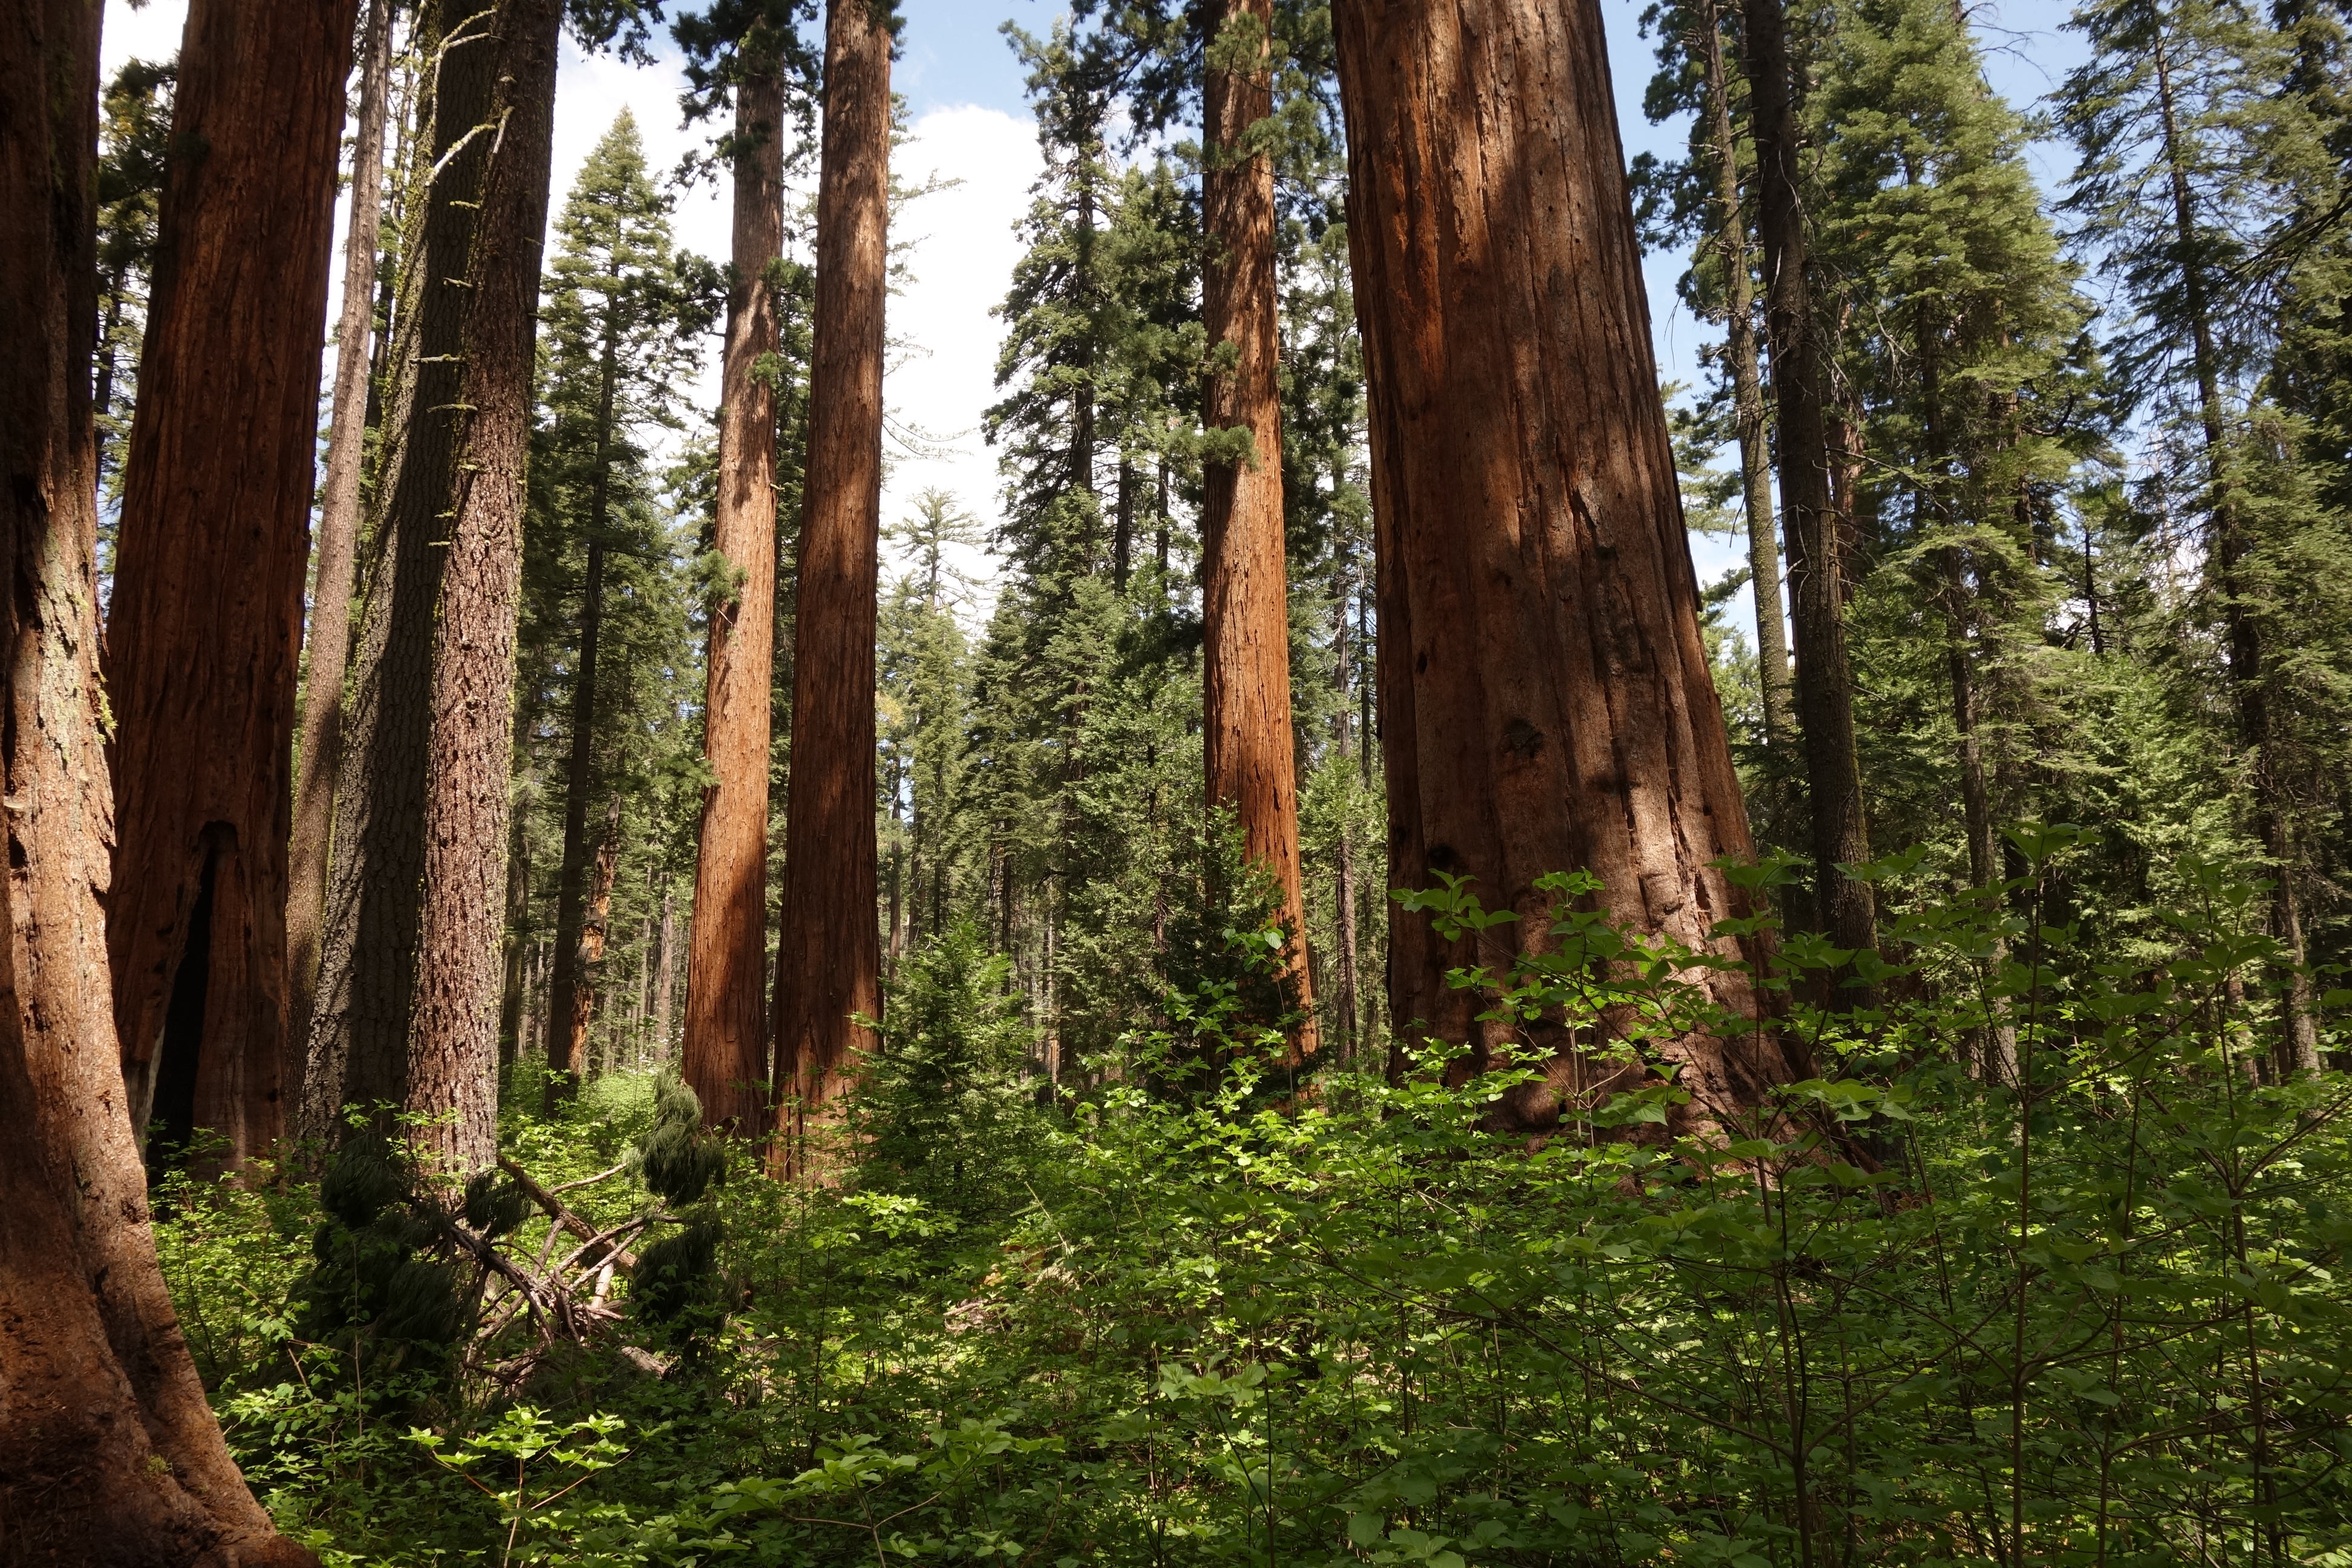 Large evergreen tree trunks dominate the view, reaching into the sky from the forest floor